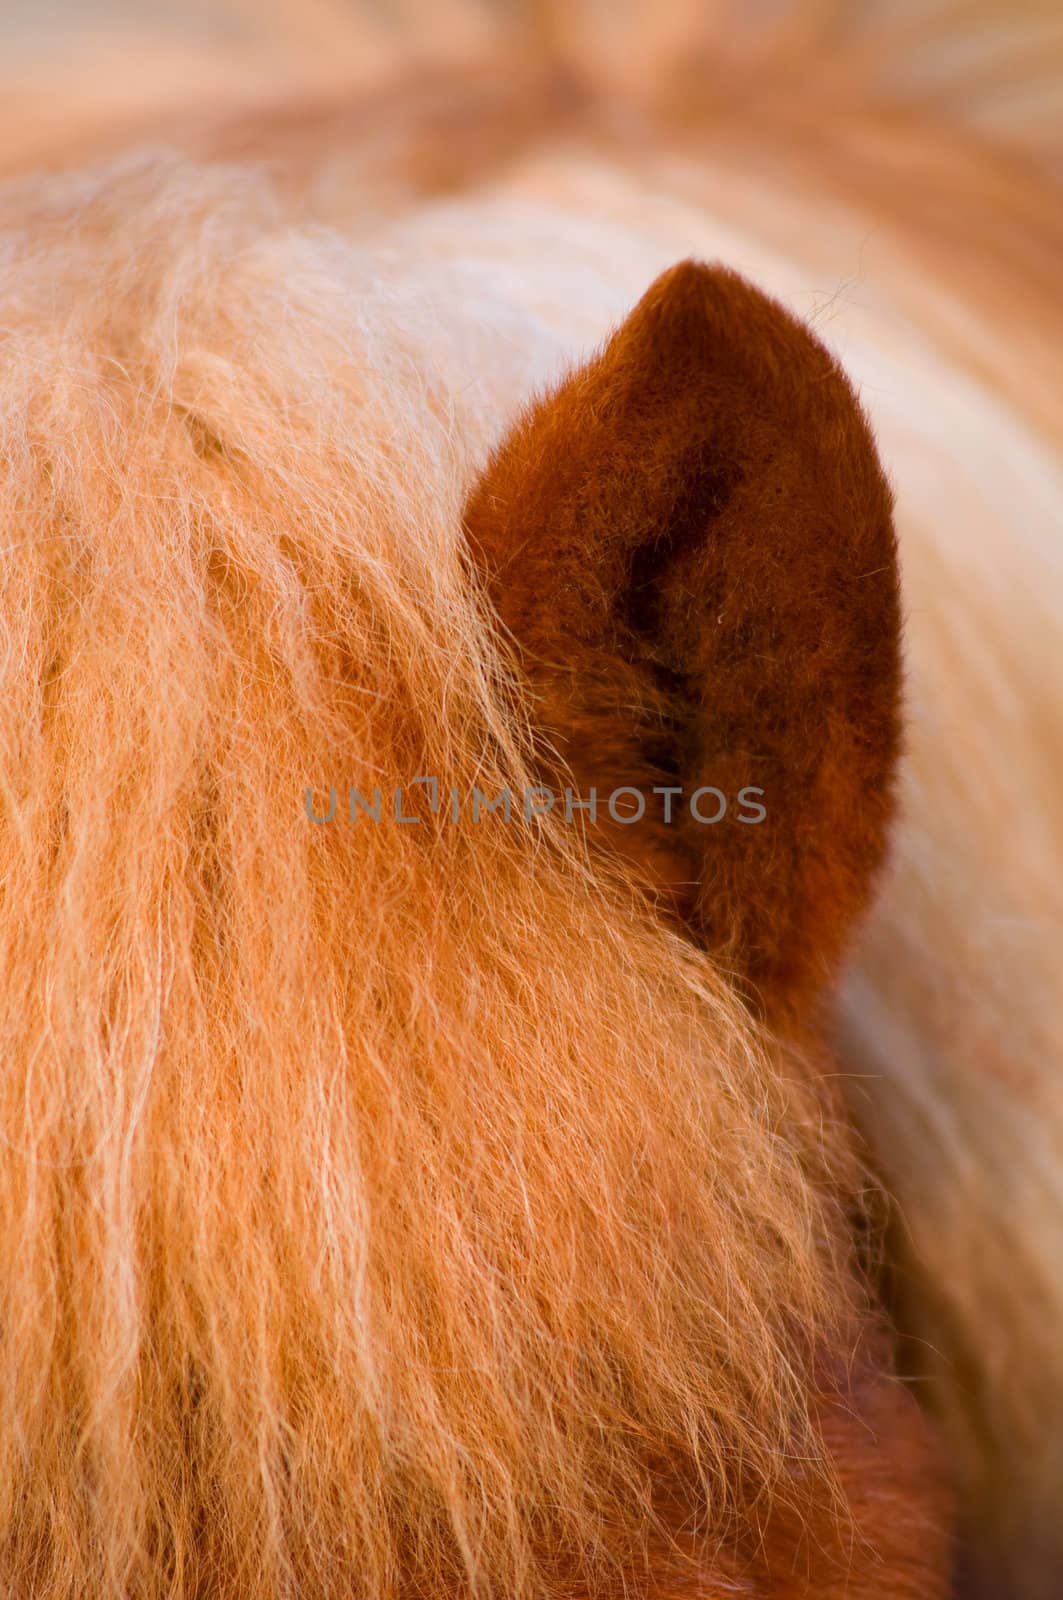 horses ear  by Magnum